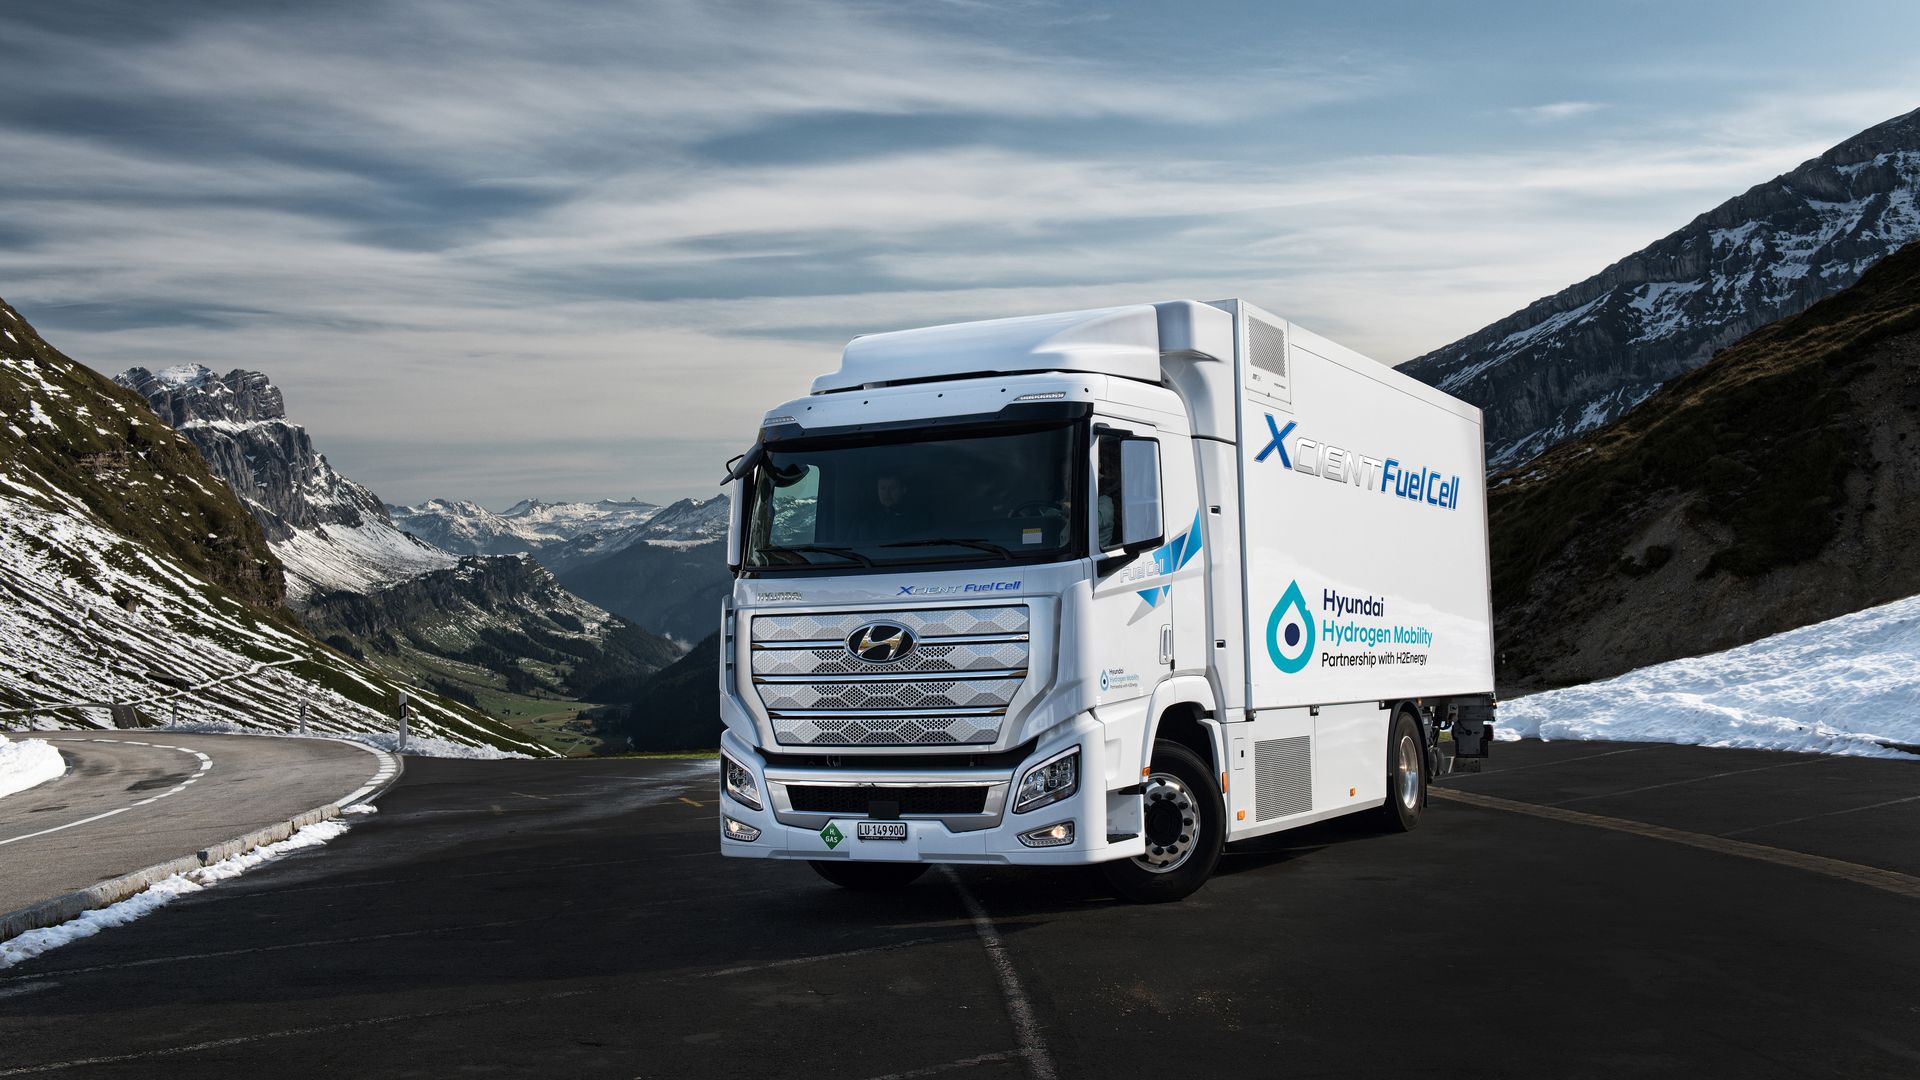 Image of Hyundai XCIENT fuel cell truck on a road in a snowy mountain range